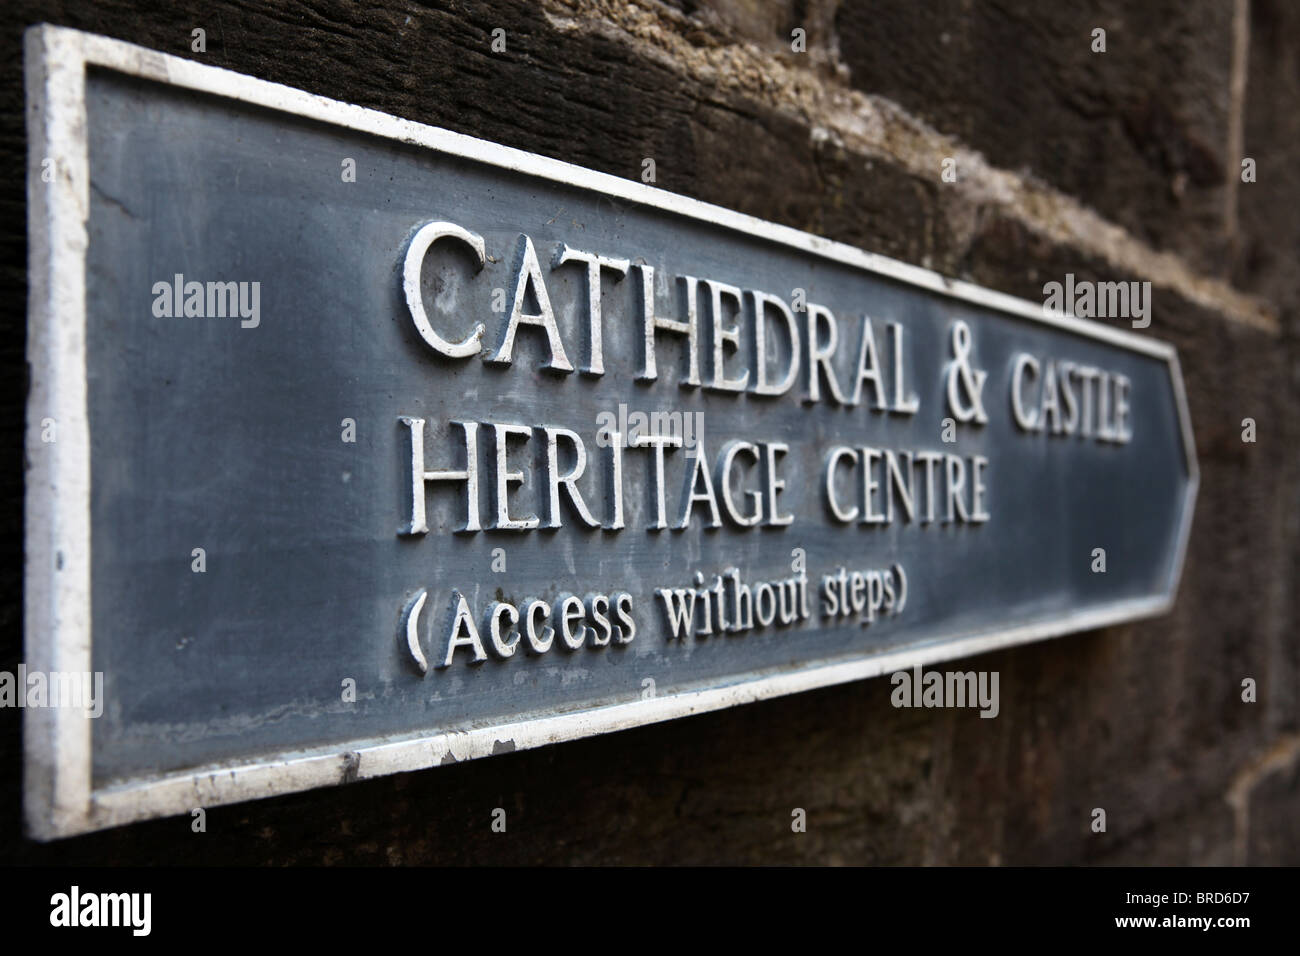 A sign points towards the Durham Cathedral and Castle Heritage Centre. Stock Photo